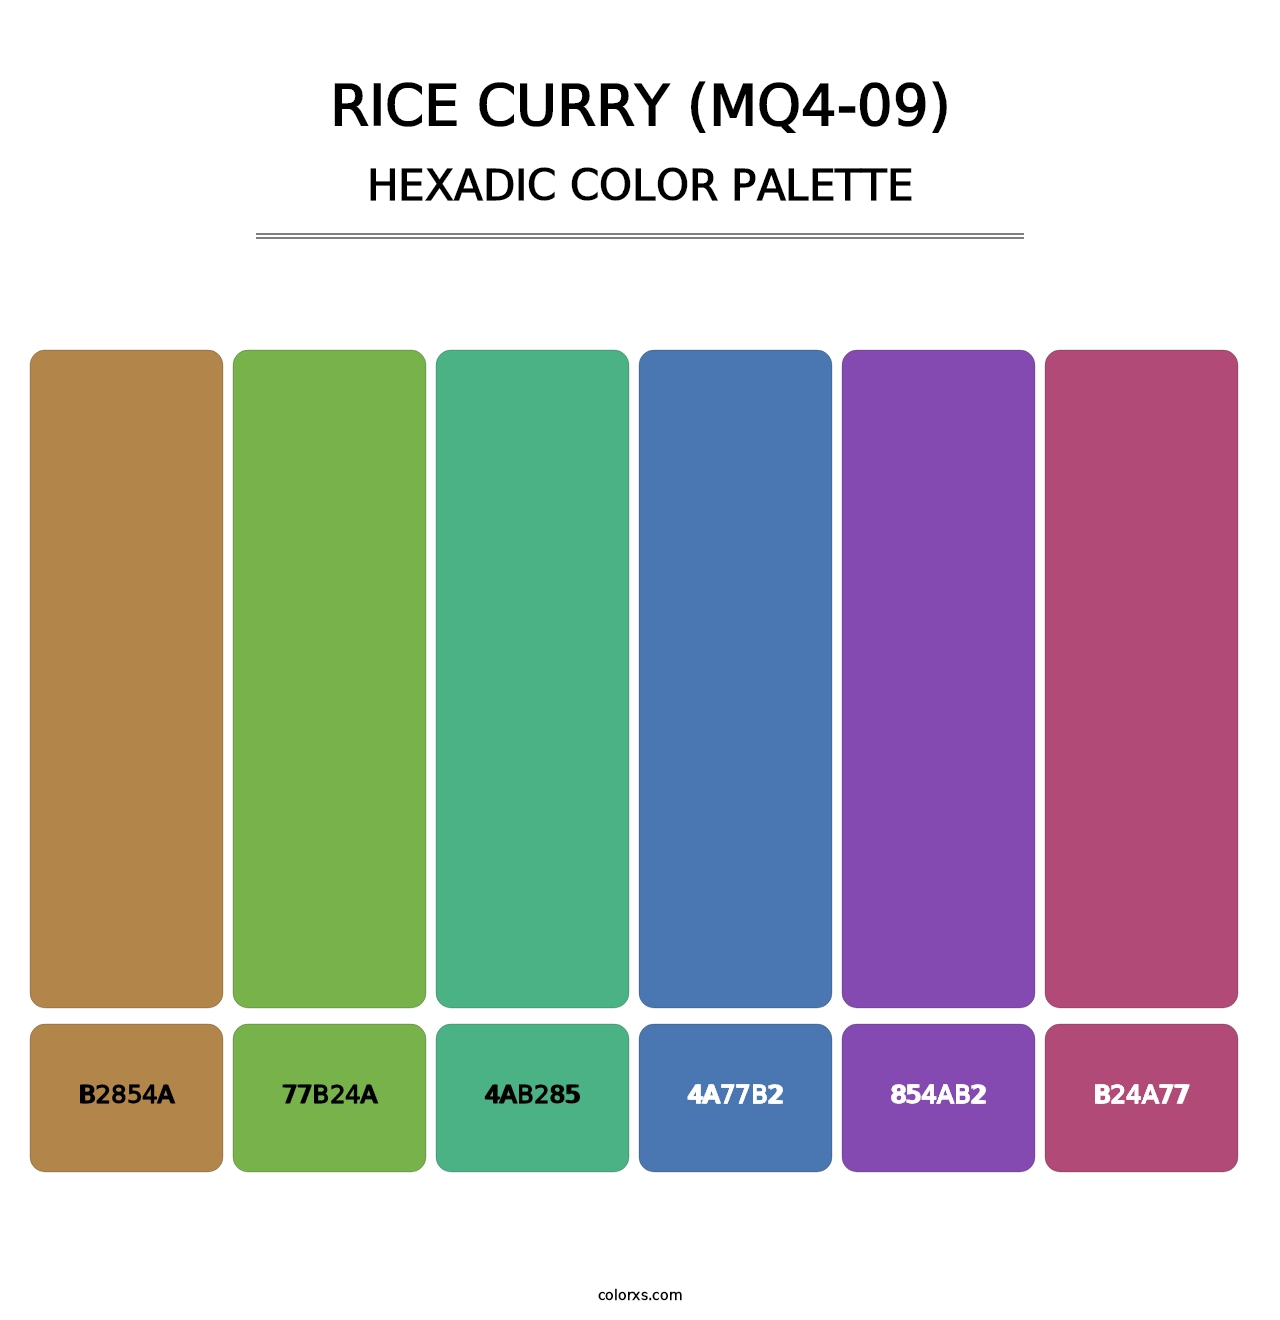 Rice Curry (MQ4-09) - Hexadic Color Palette